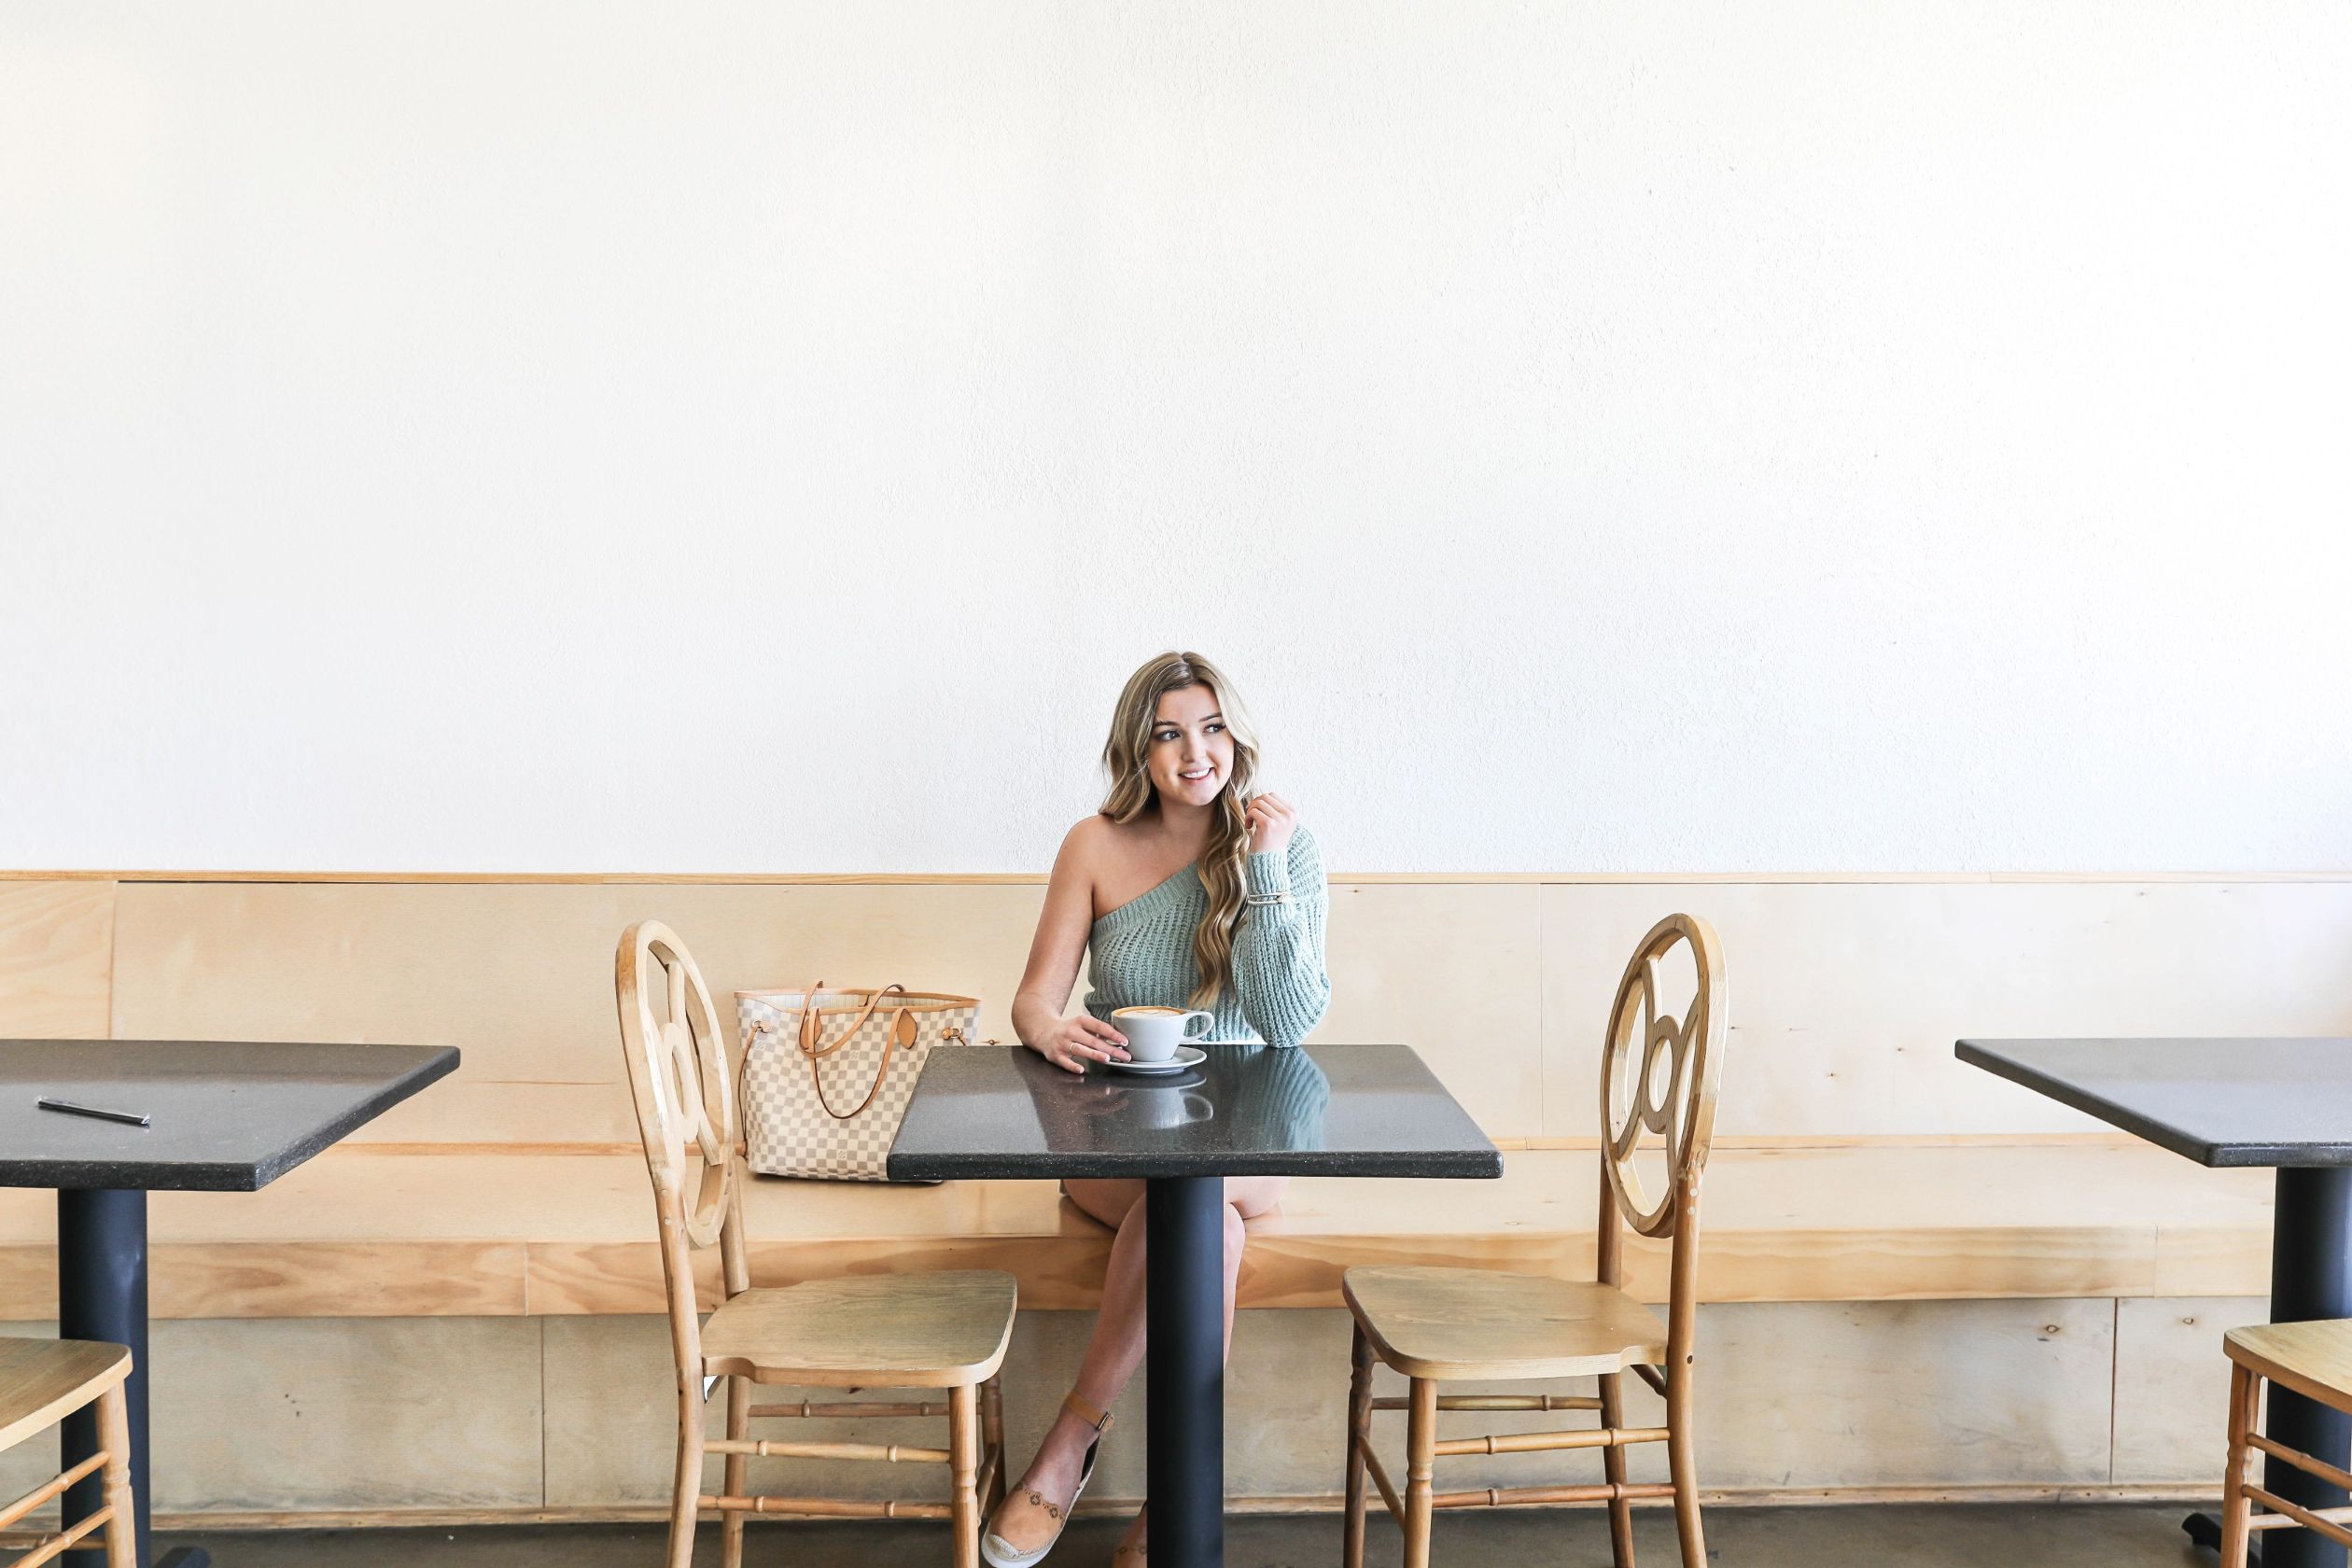 Best Kansas City Coffee shops! Cute restaurant photoshoot wearing an off the shoulder sweater! Details on fashion blog daily dose of charm by lauren lindmark